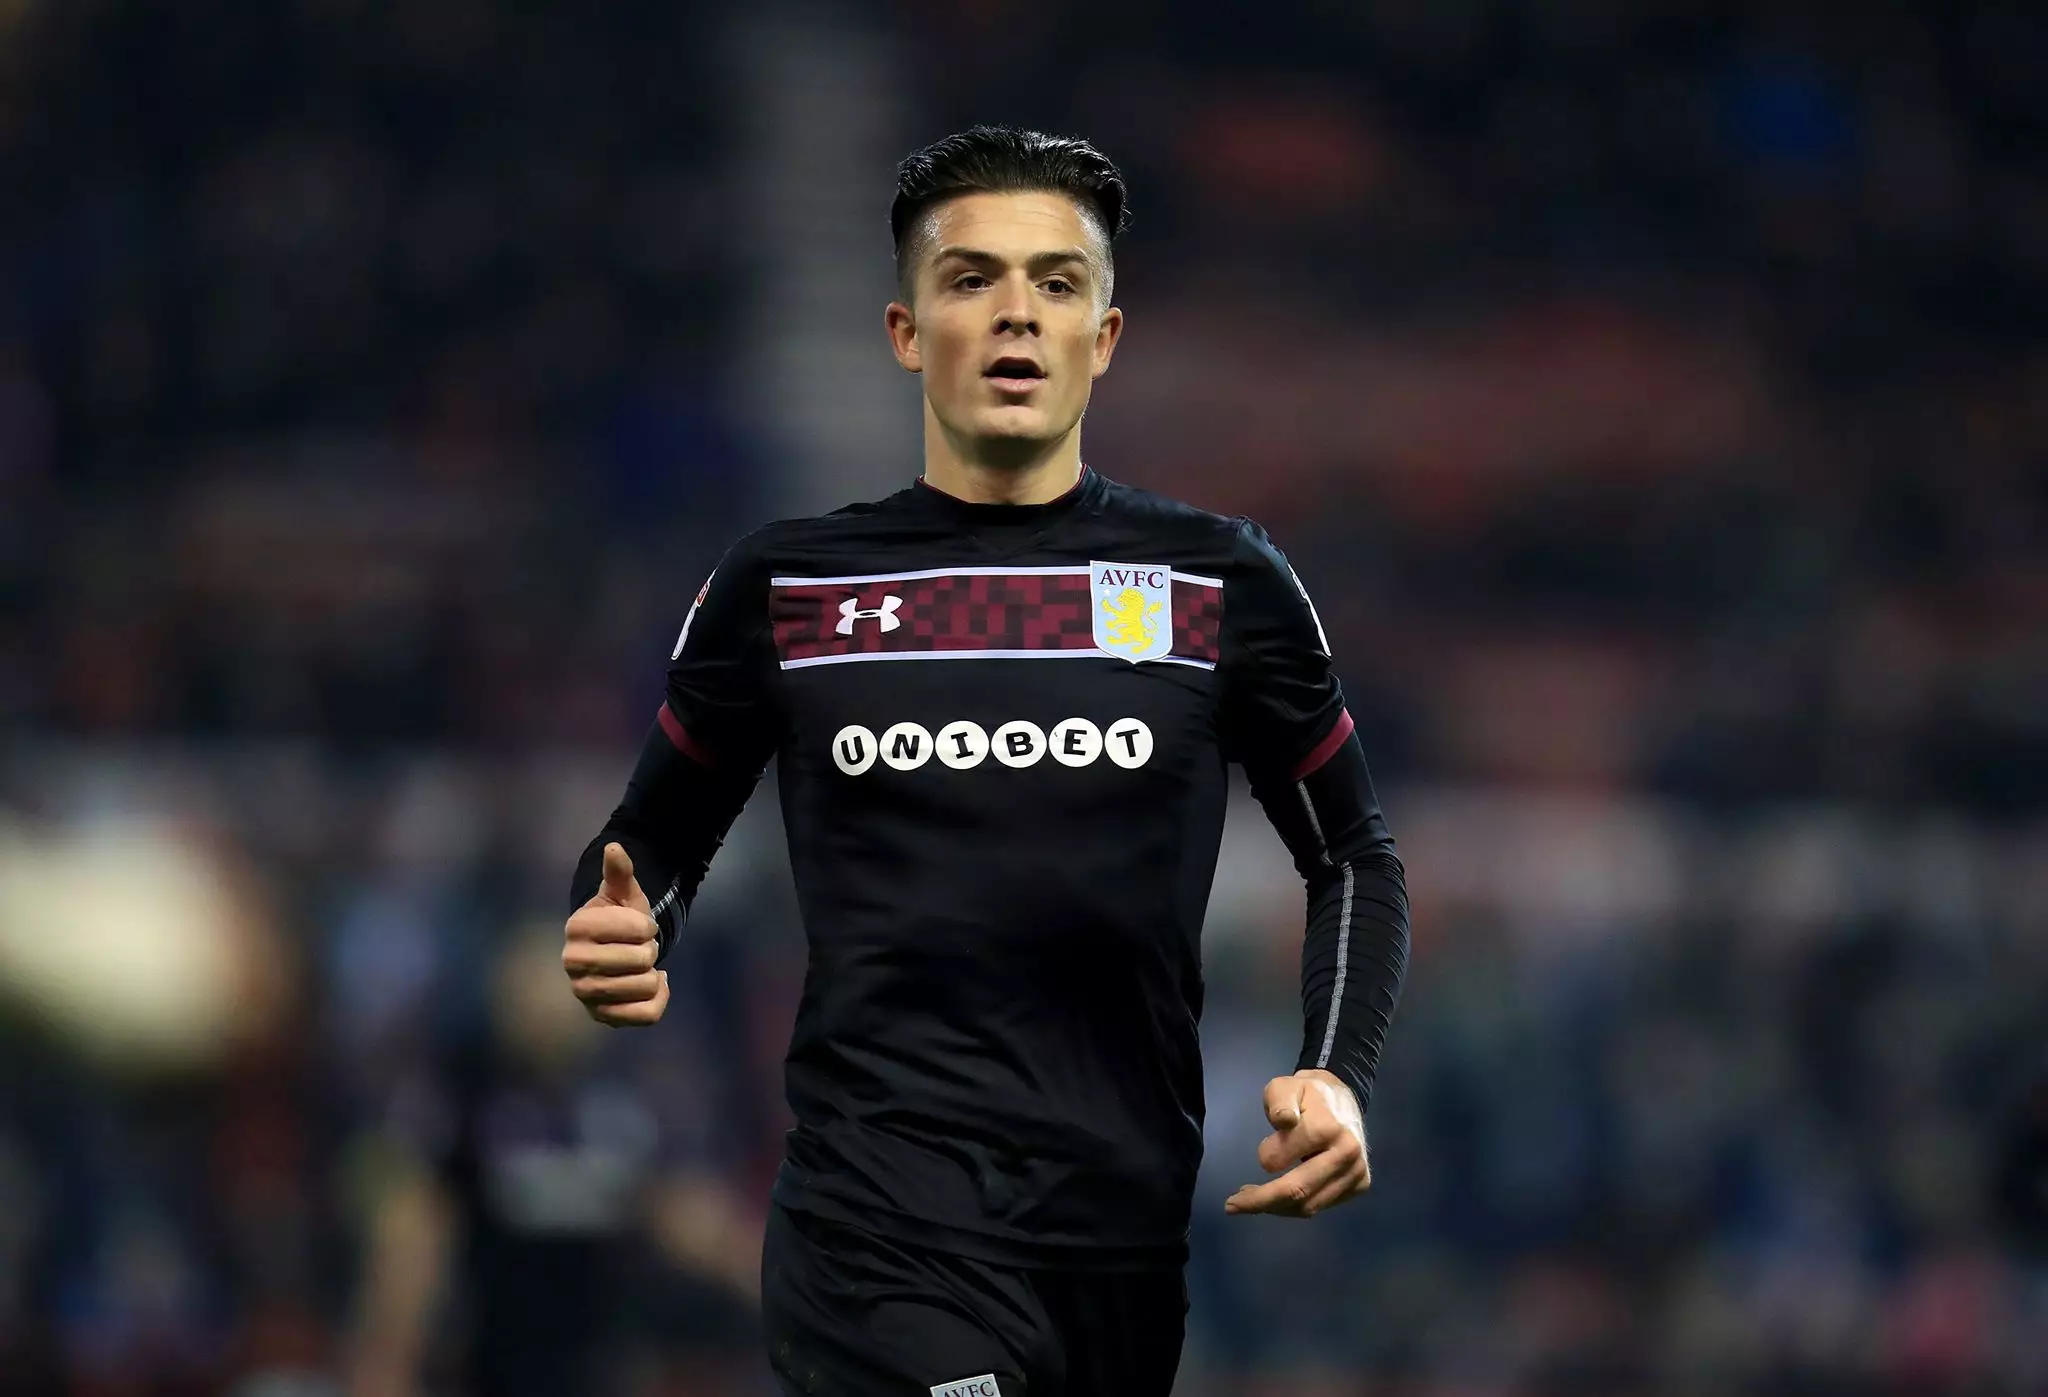 Grealish could be back in the Premier League whether or not Villa are. Image: PA Images